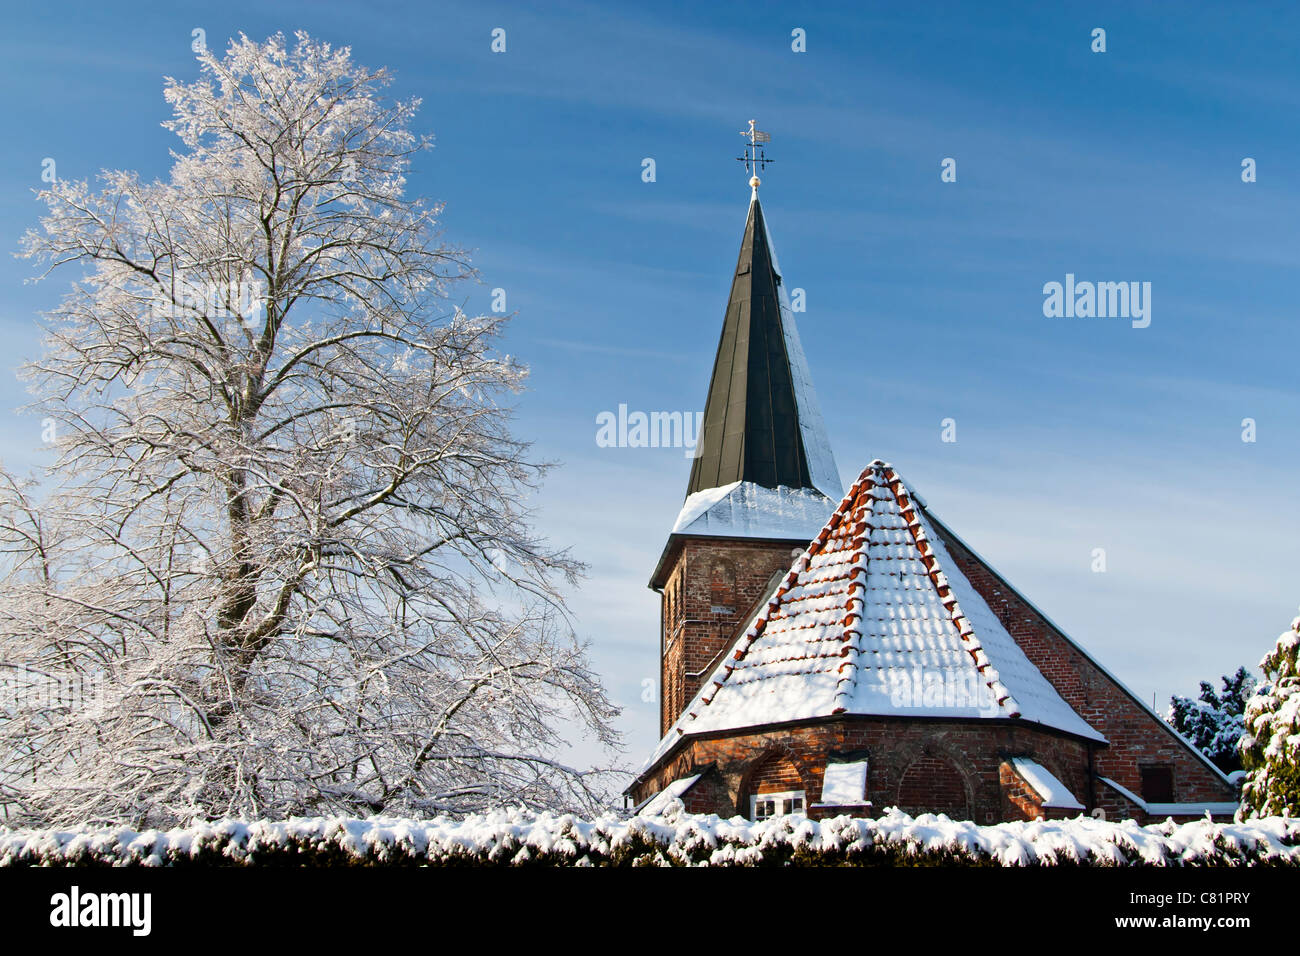 The Gertruden Chapel during winter on the Gertruden graveyard in Oldenburg, which is the oldest Christian building in Oldenburg Stock Photo